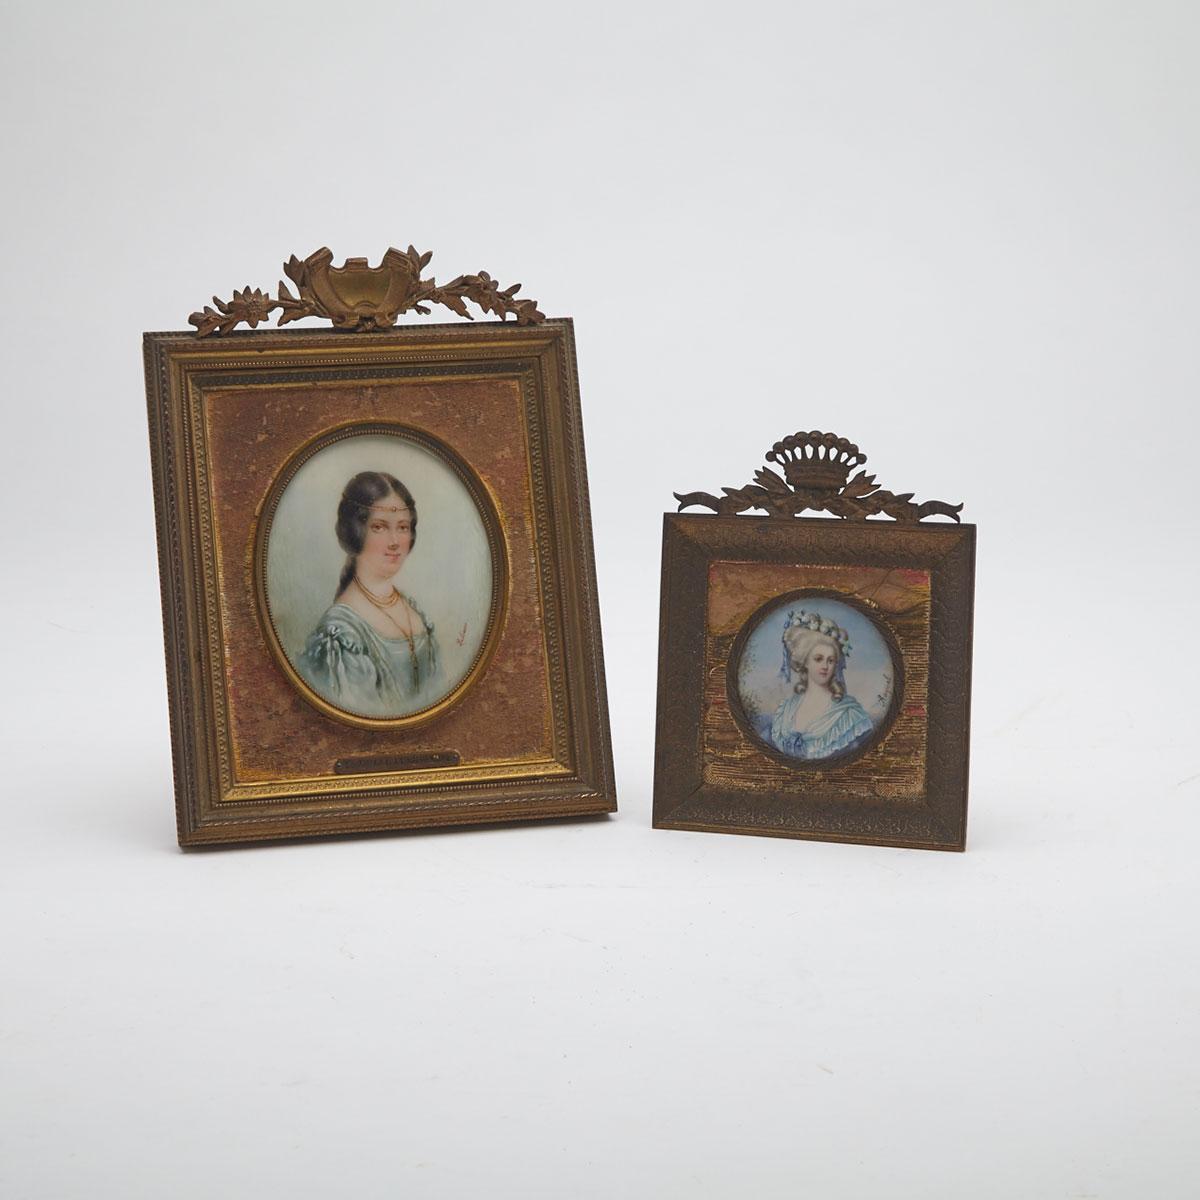 Two French Portrait Miniatures on ivory, c.1900